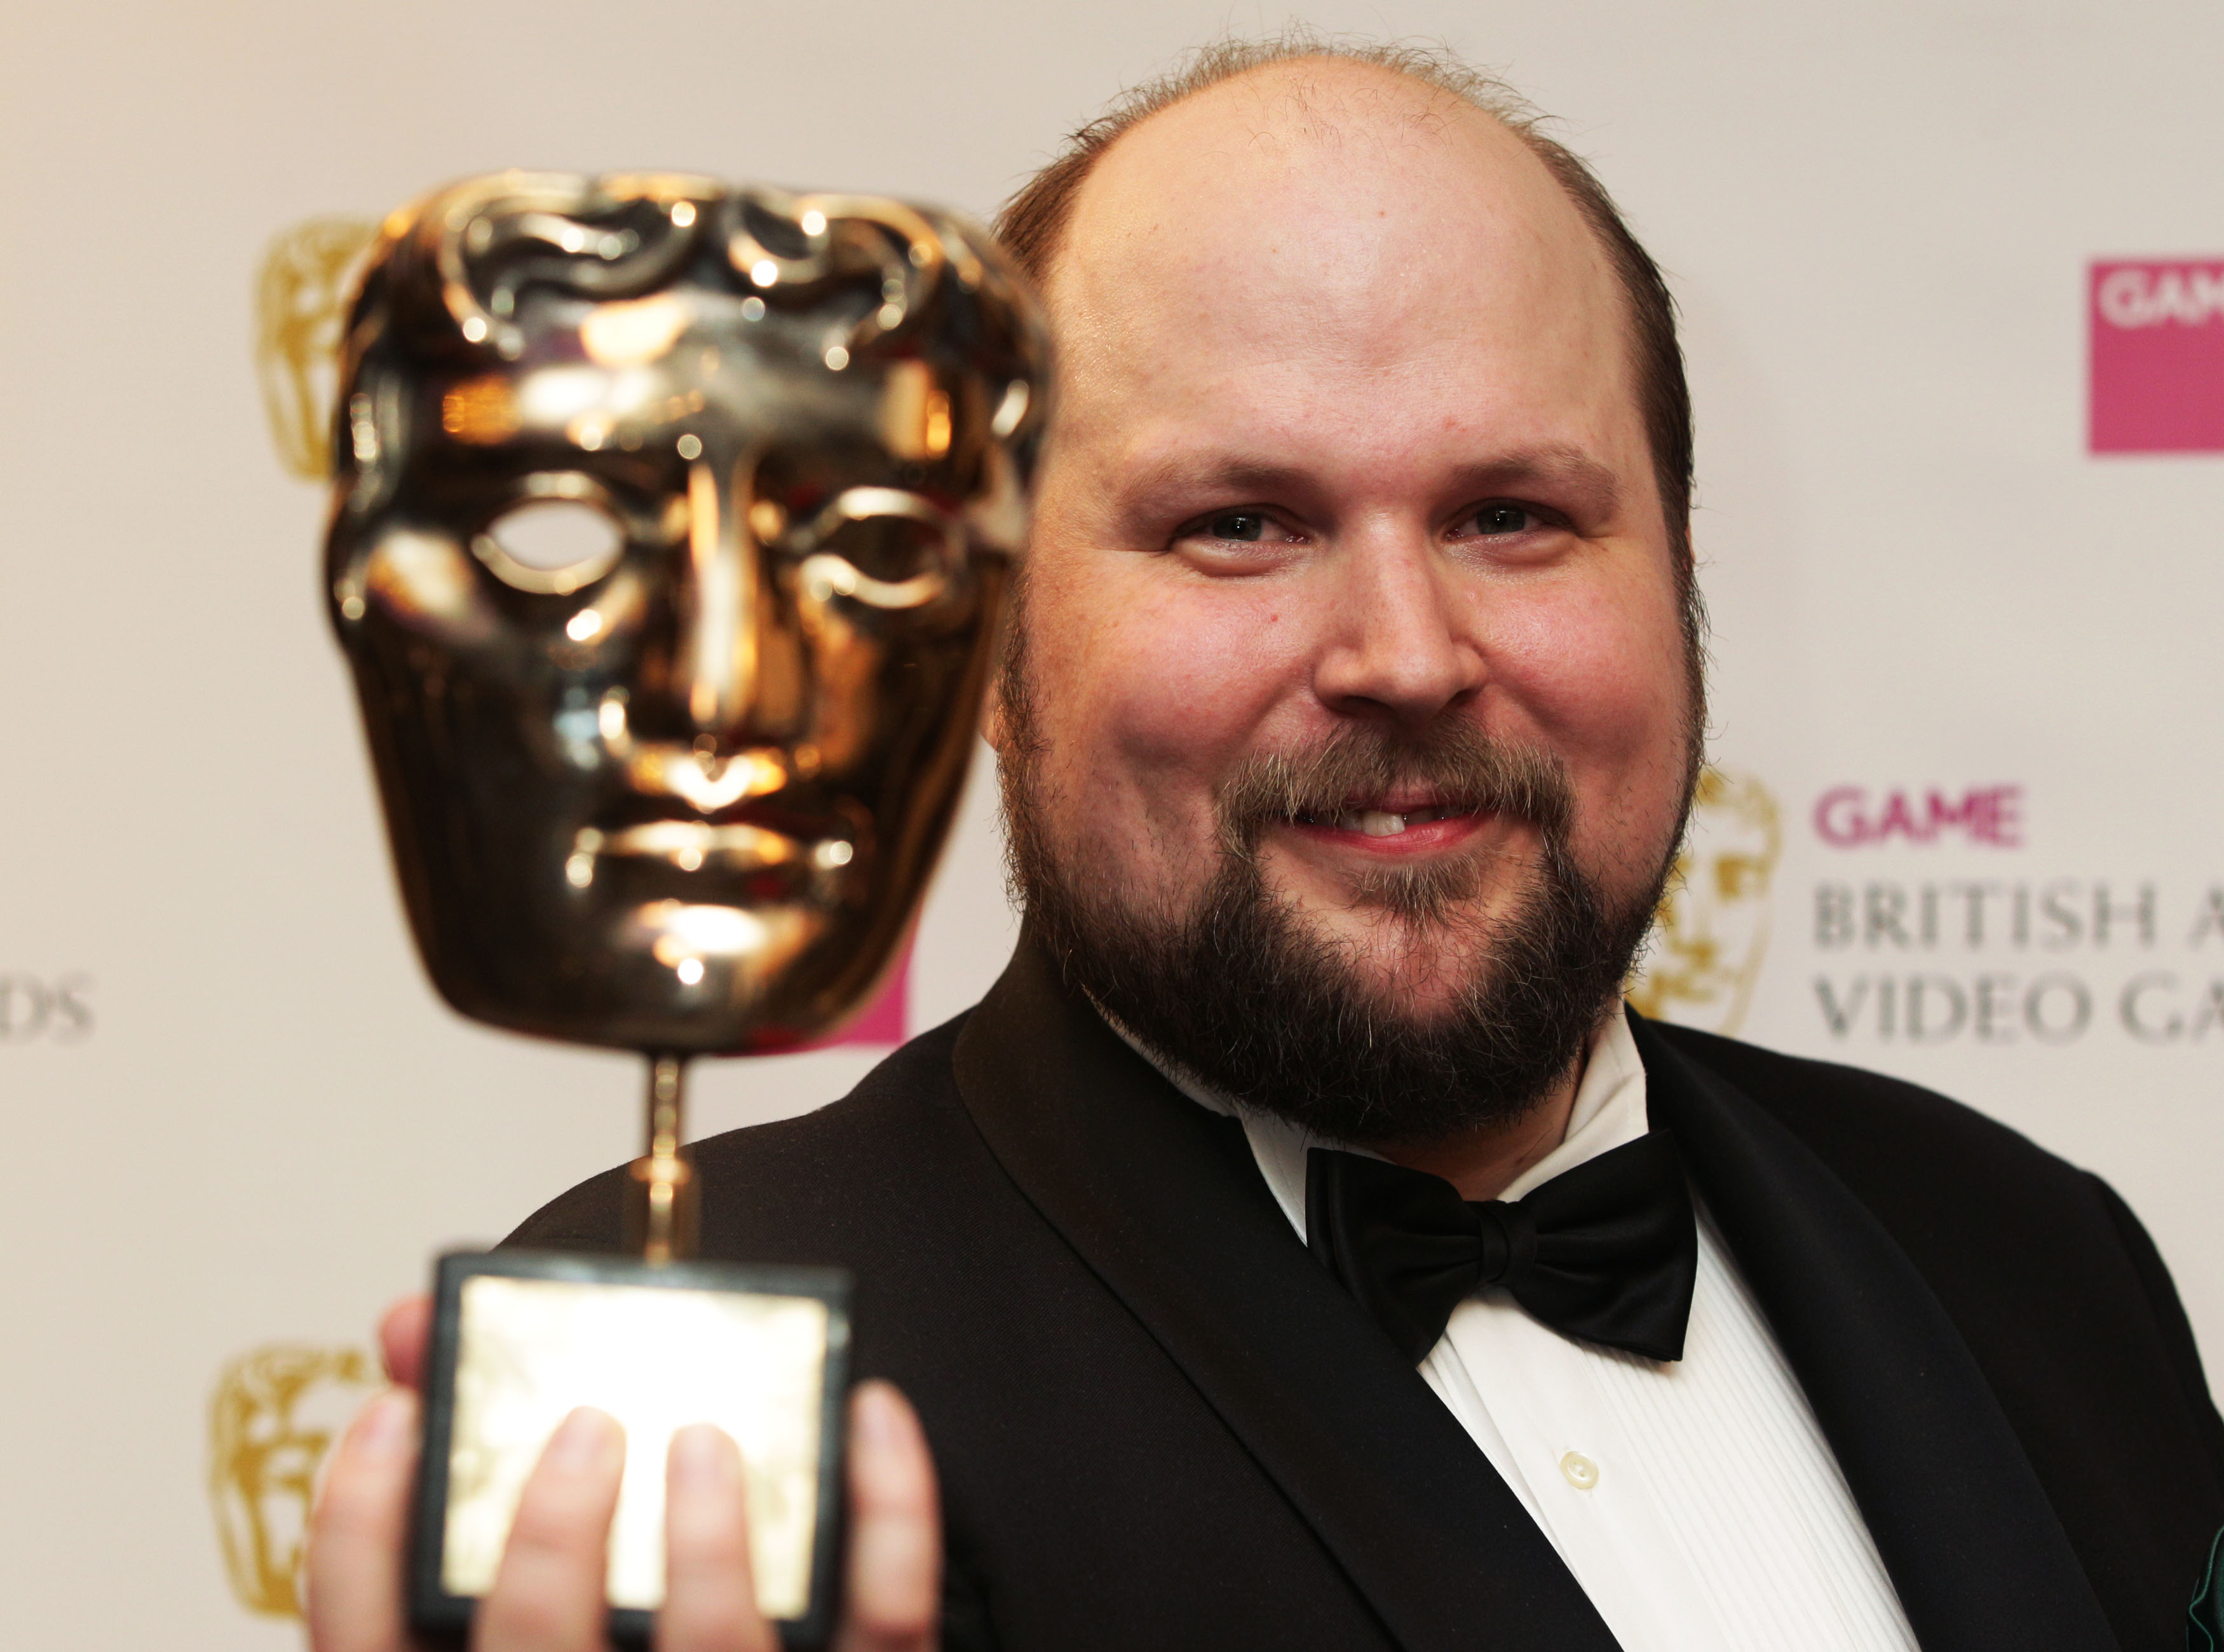 Minecraft Creator Notch Deletes Twitter Account After Asking GMTK